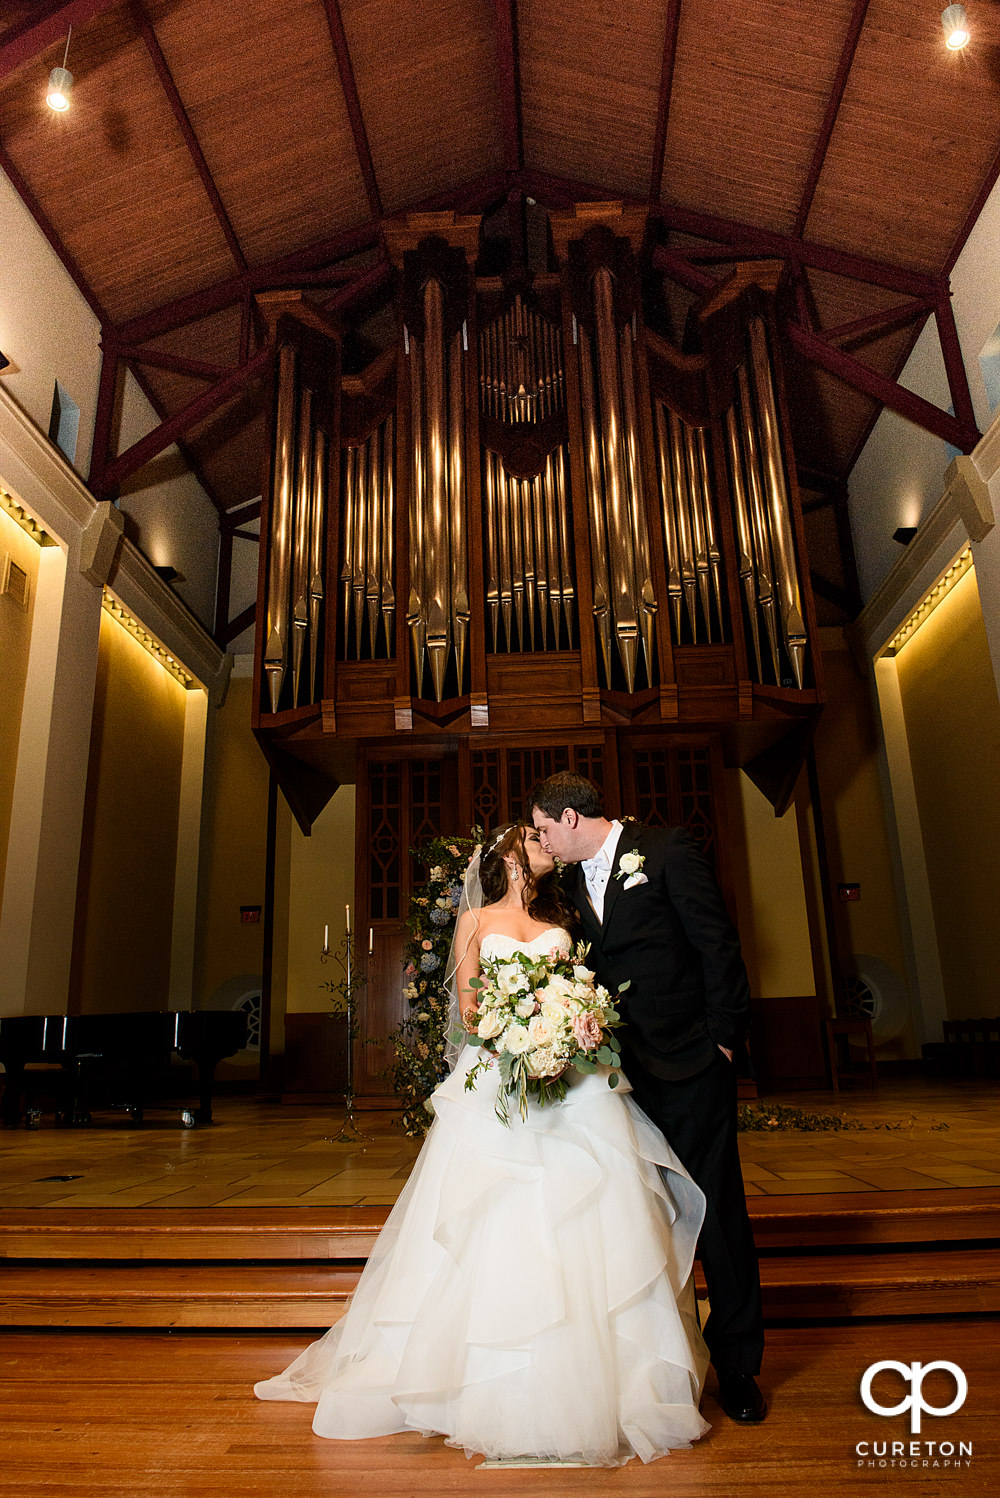 Couple kissing after their wedding at Daniel Chapel.